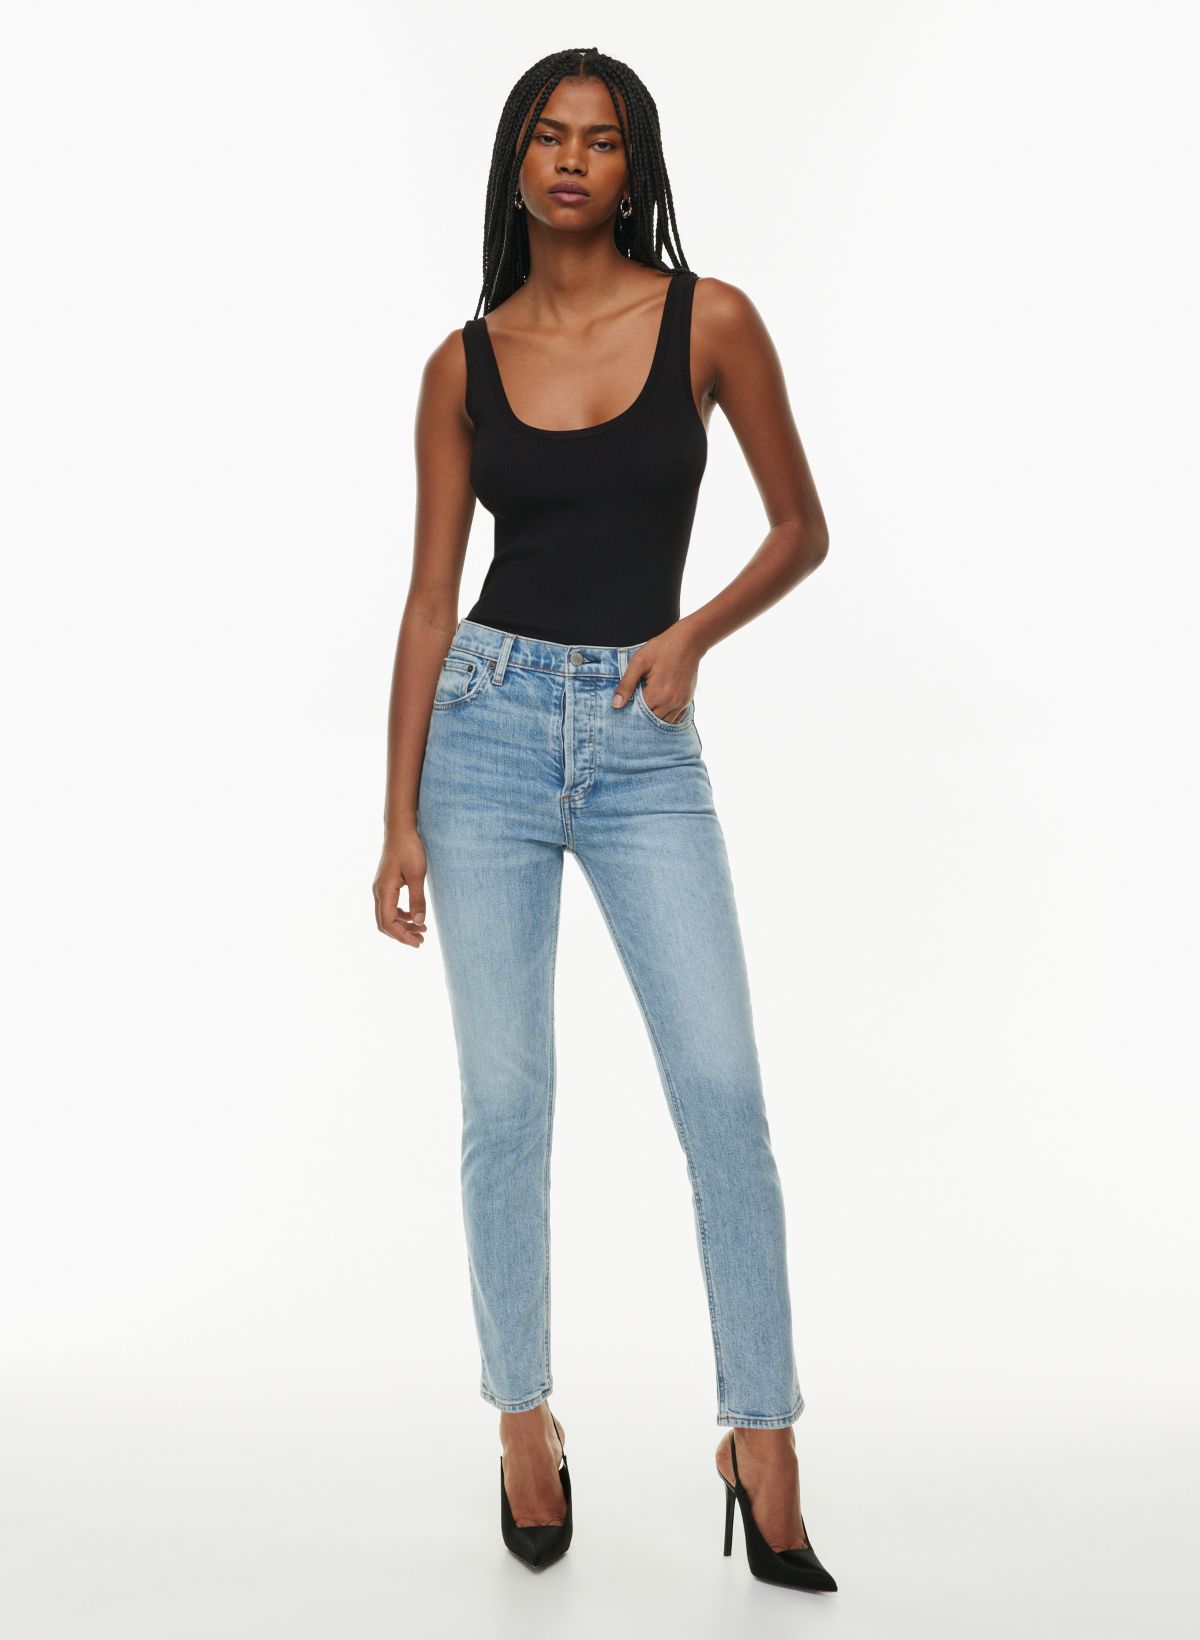 Dark Wash Ankle Zip Jeans – Petite Ave